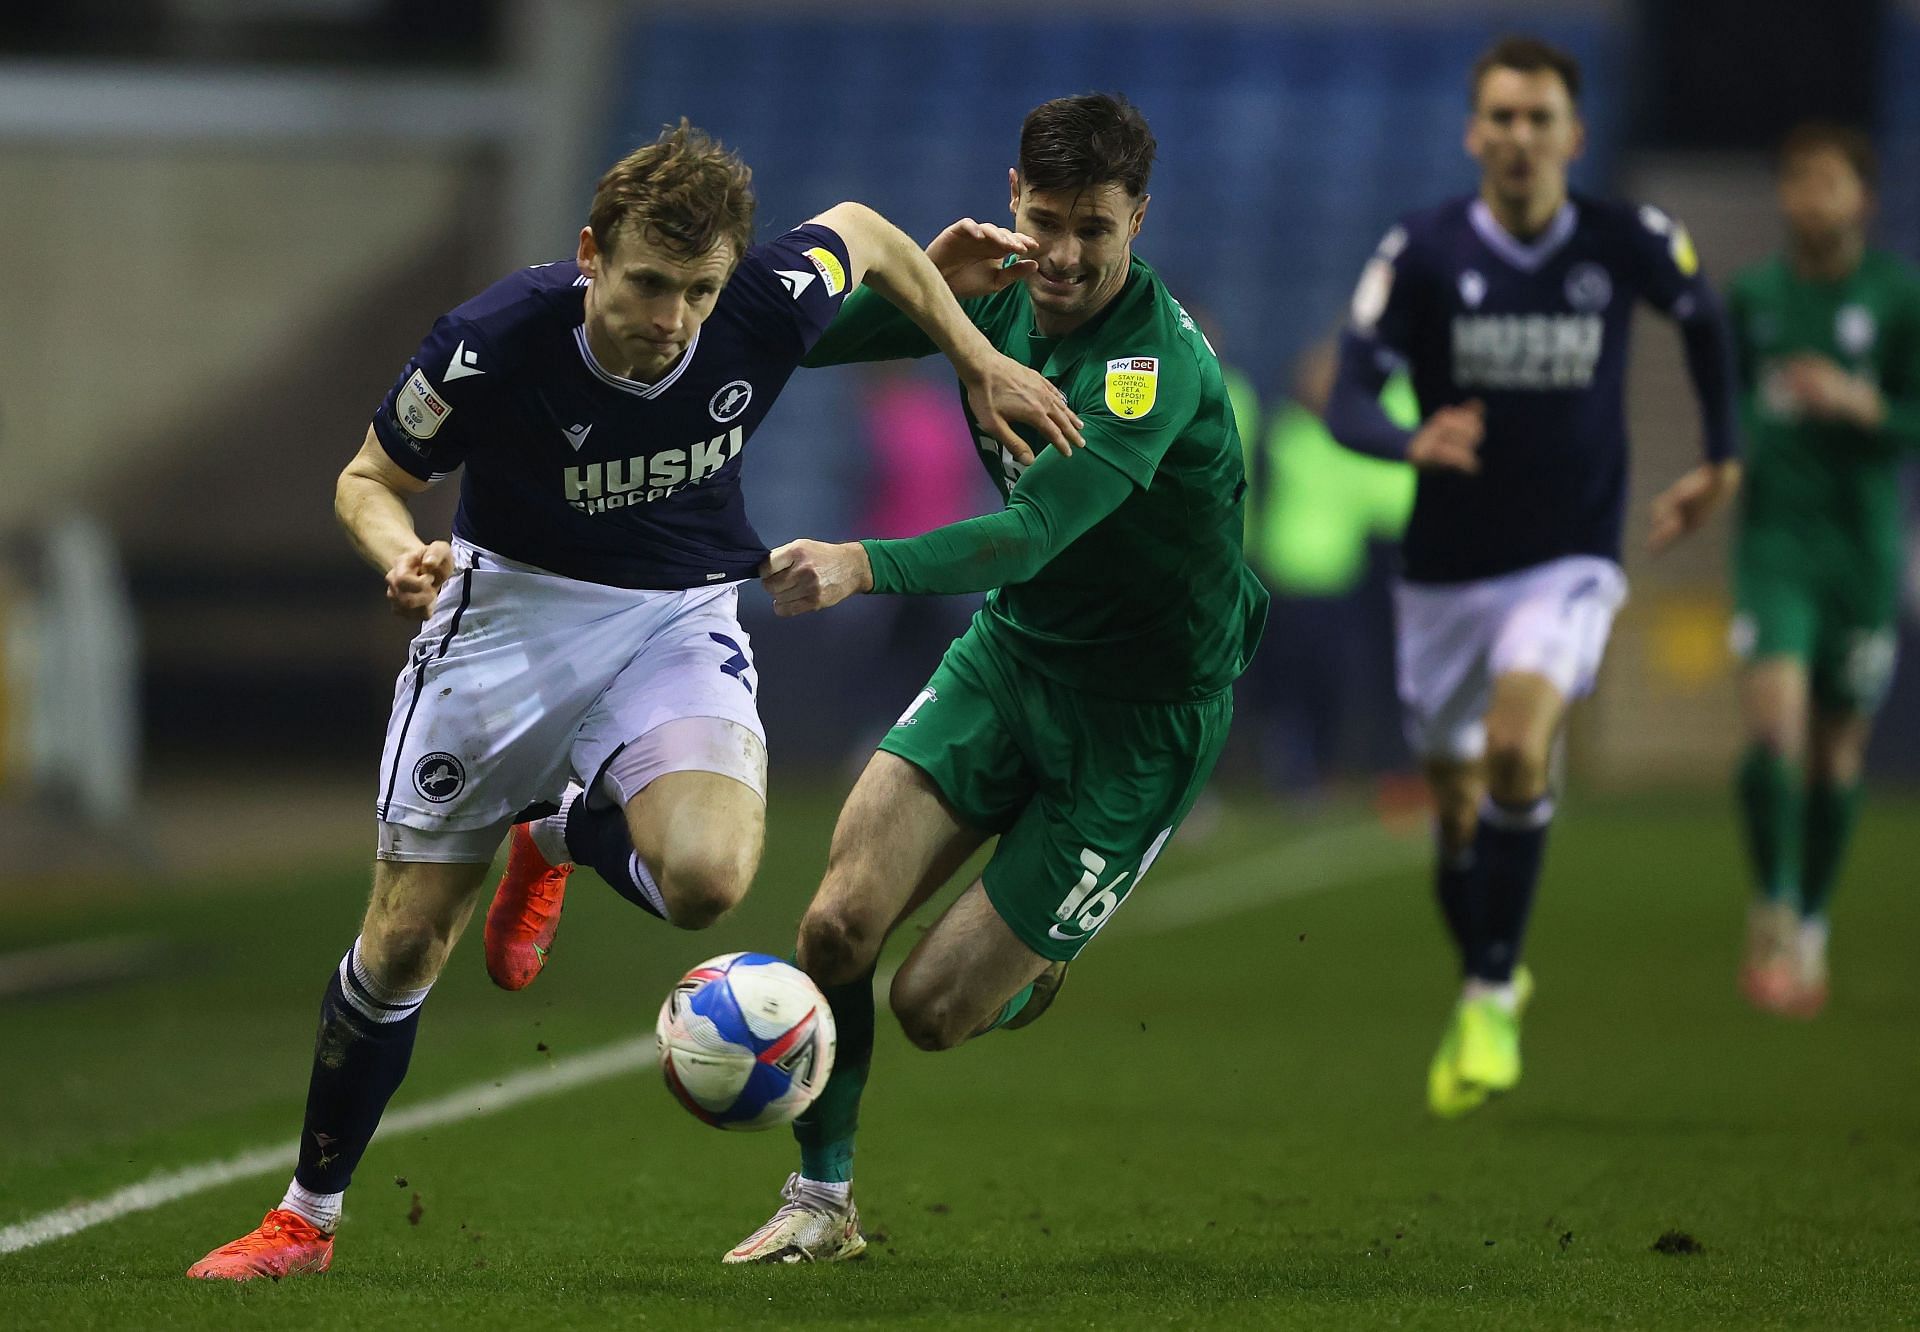 Millwall play host to Preston North End on Tuesday